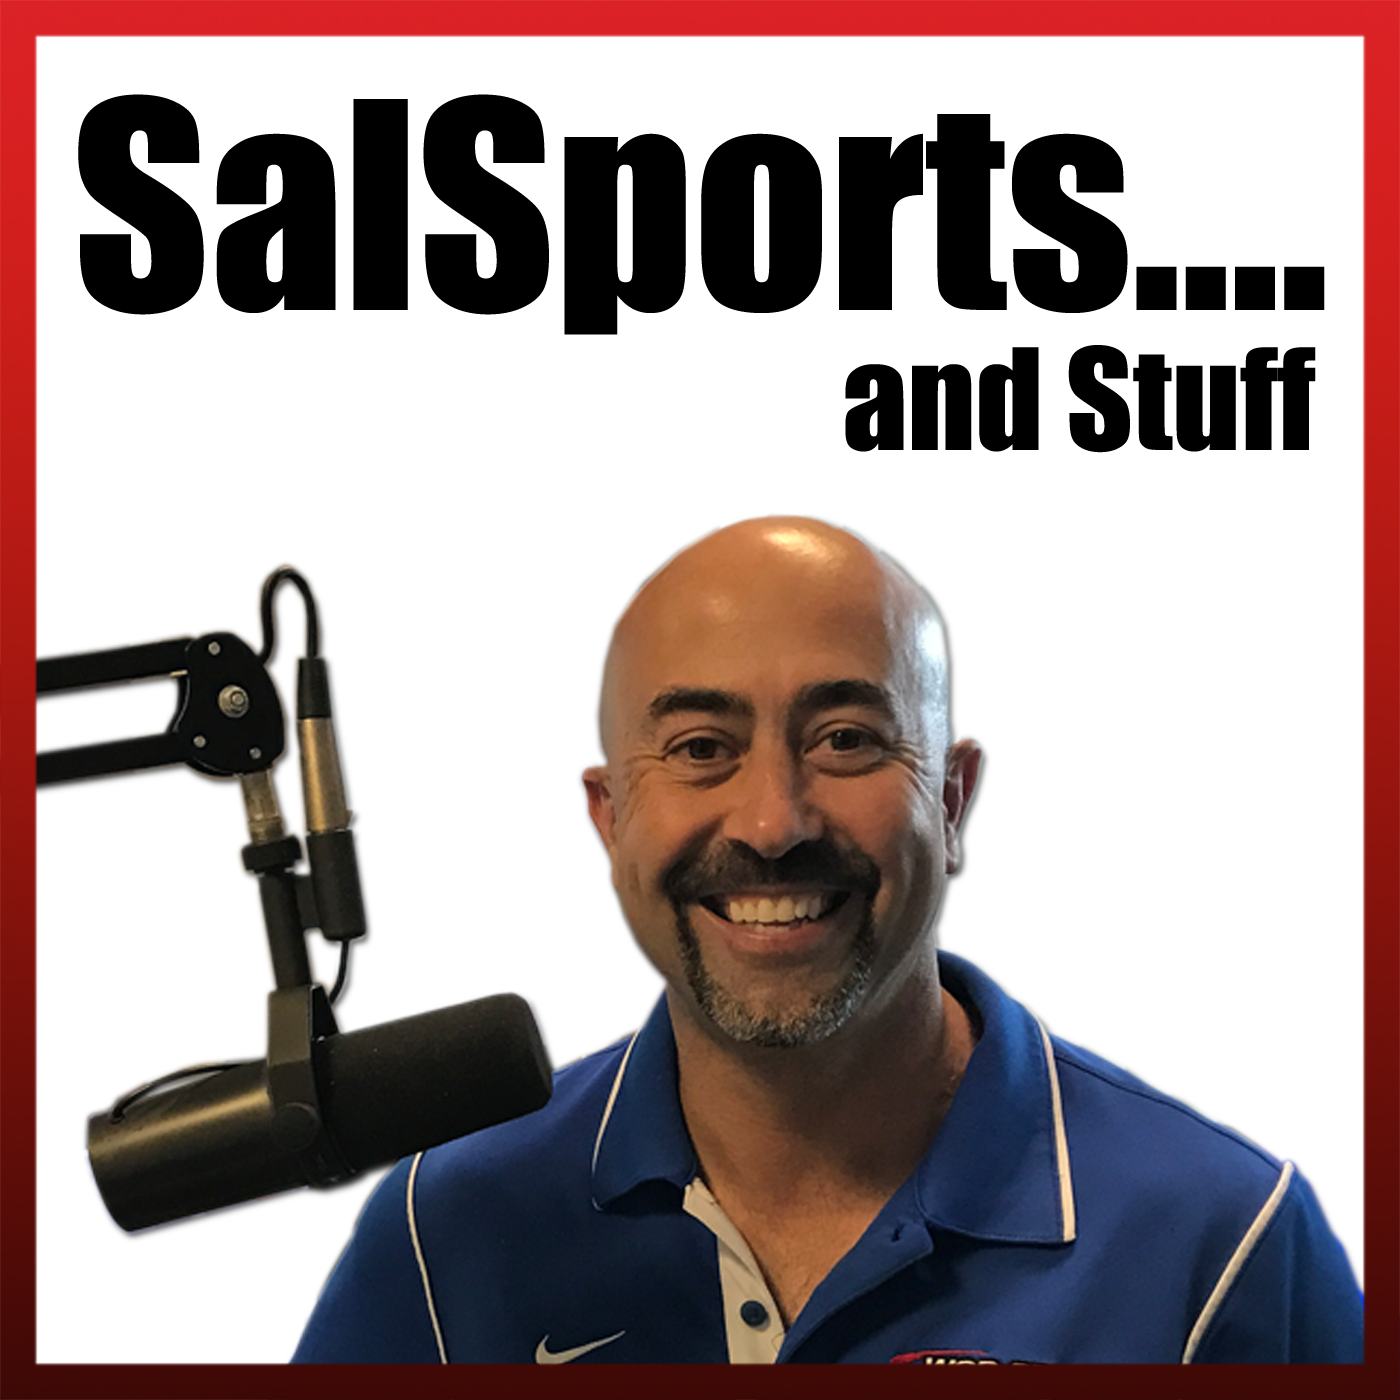 SalSports...and Stuff 18 - Michael Peca gives an oral history of the Sabres' late '90s teams and Stanley Cup run